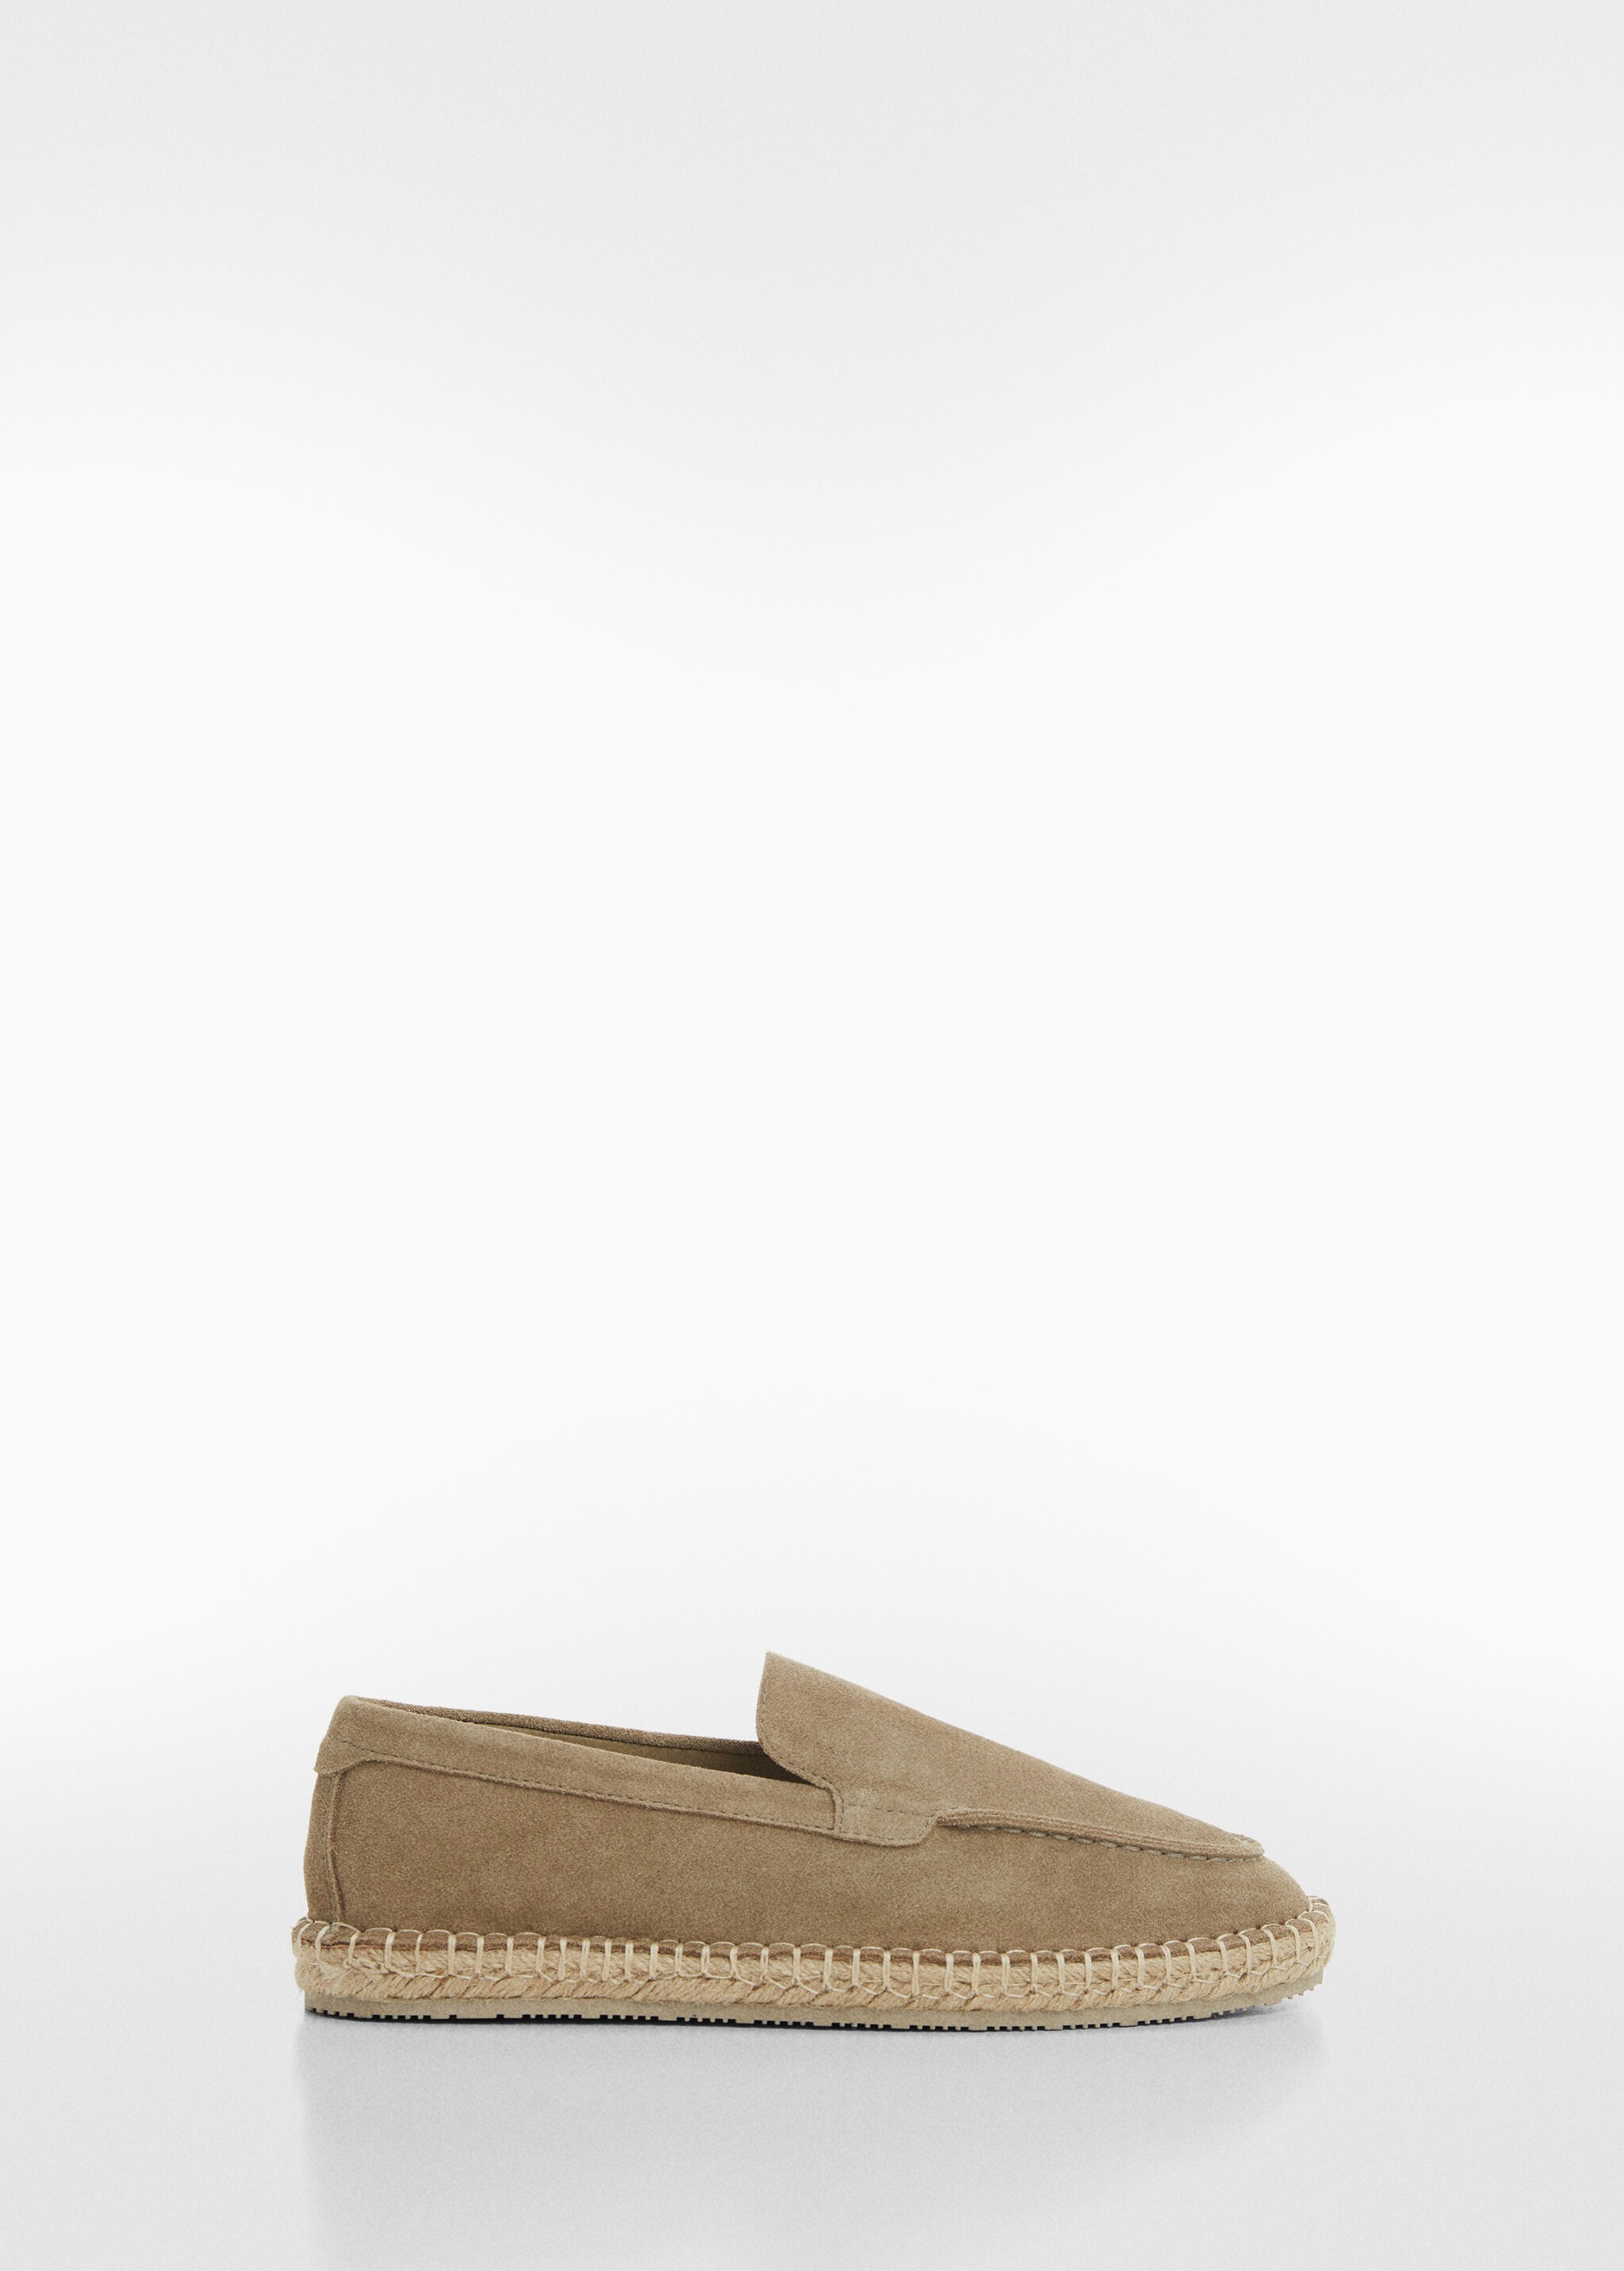 Jute suede leather espadrille - Article without model